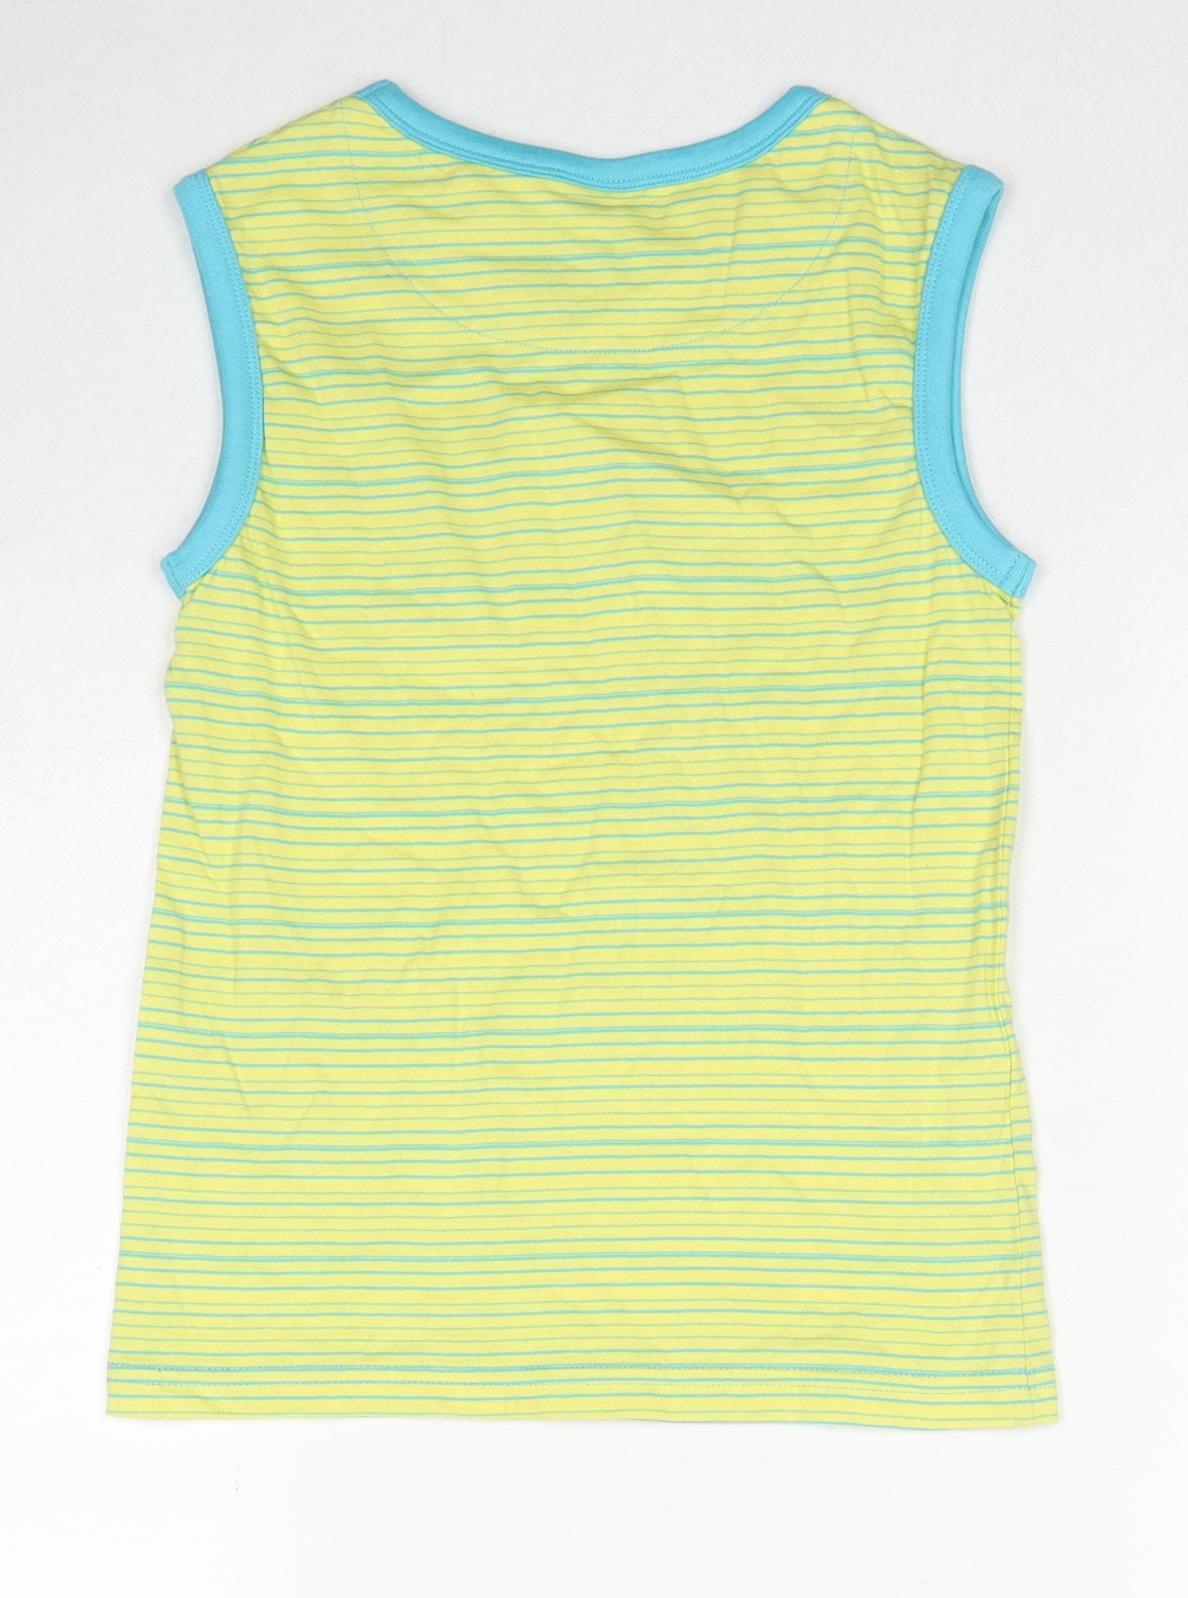 Jack Green Boys Yellow Striped Cotton Basic Tank Size 7-8 Years Round Neck Pullover